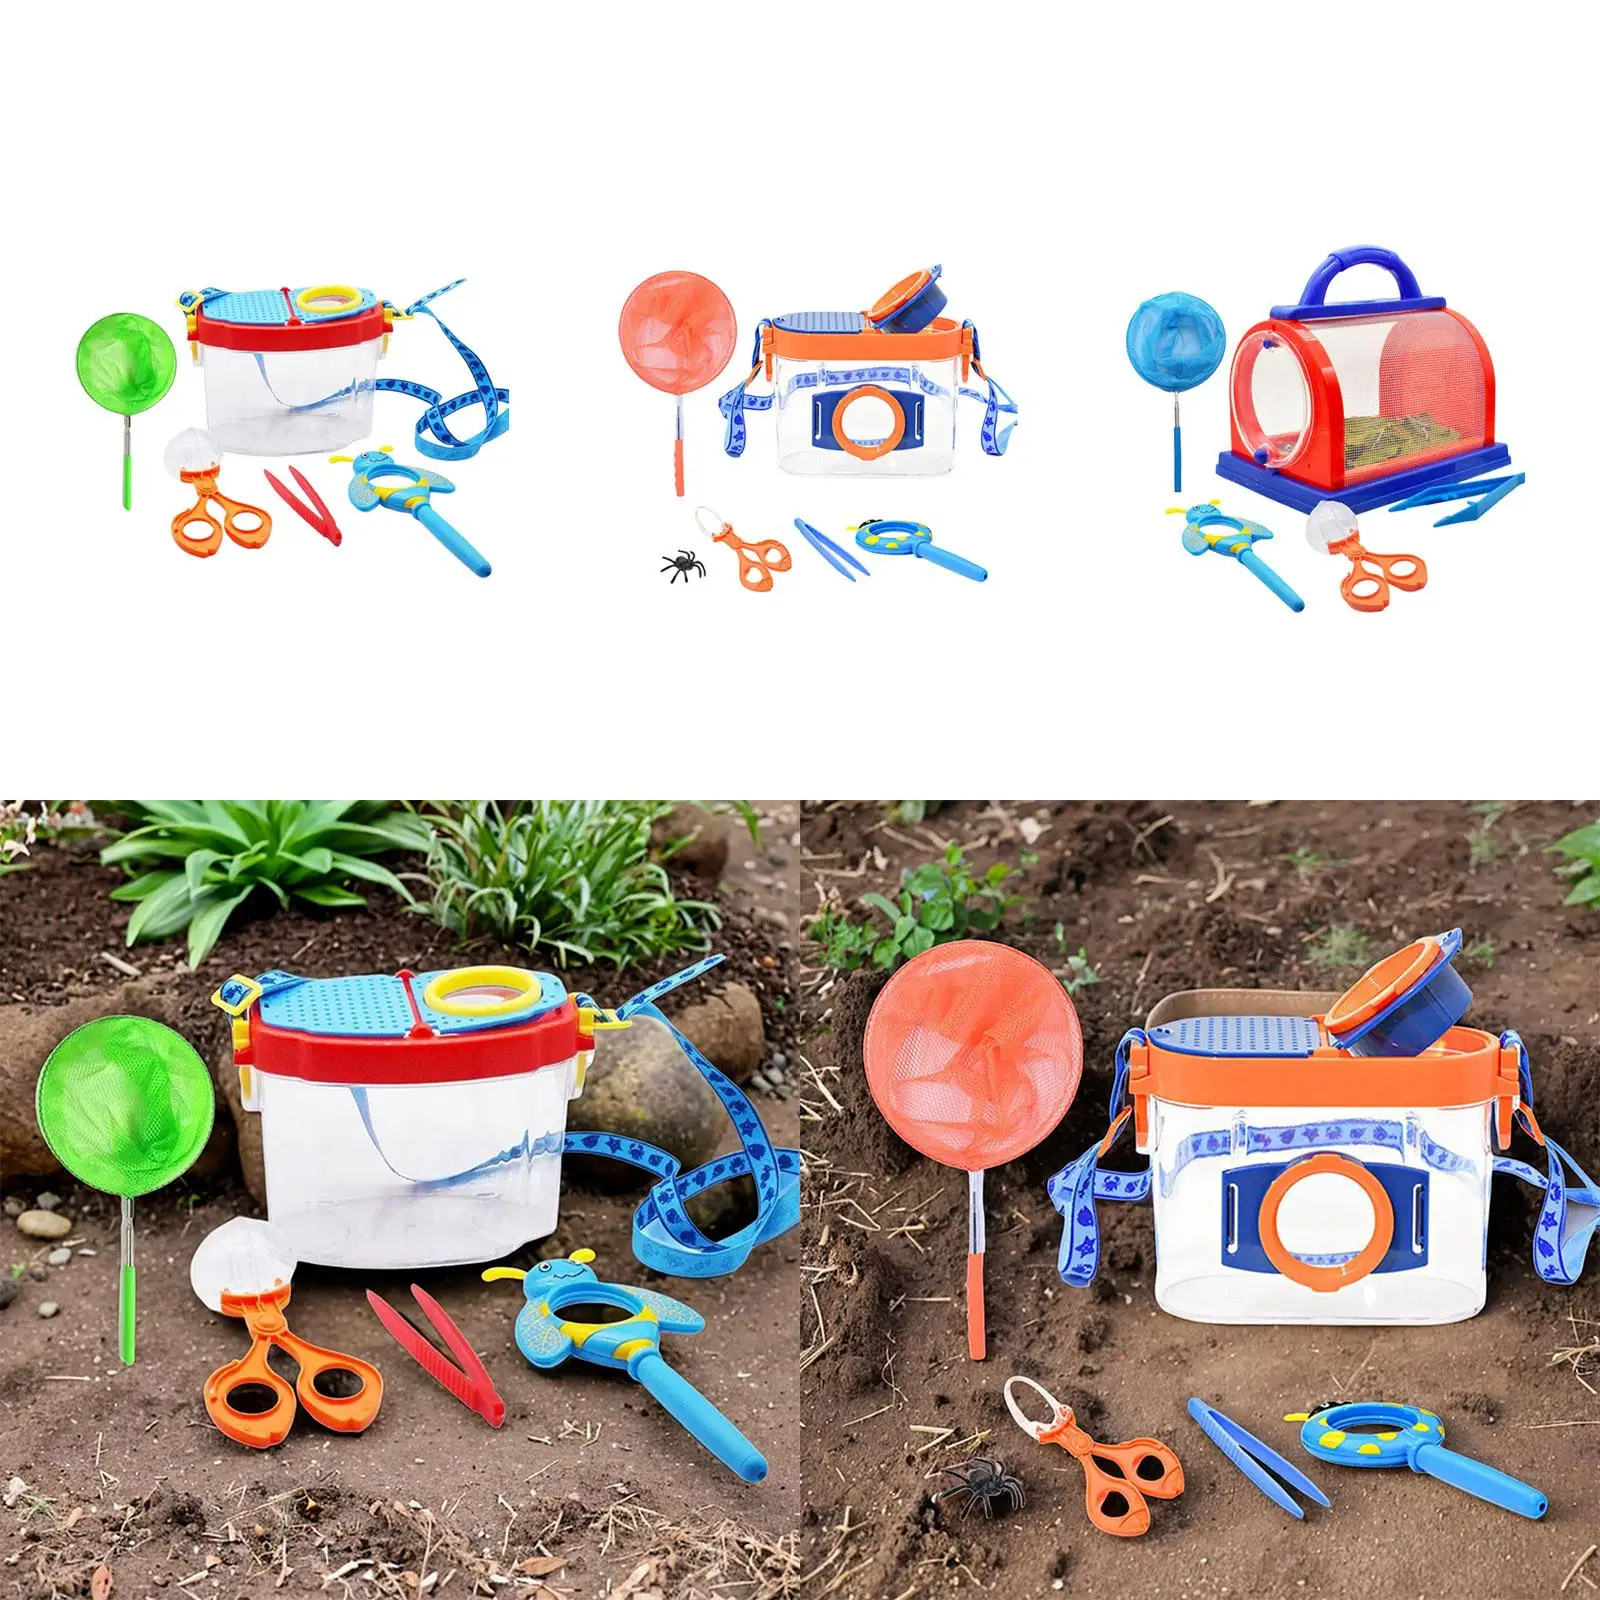 Insect Viewer Box with Clip Kids Bug Magnifying Container for DIY Experiments